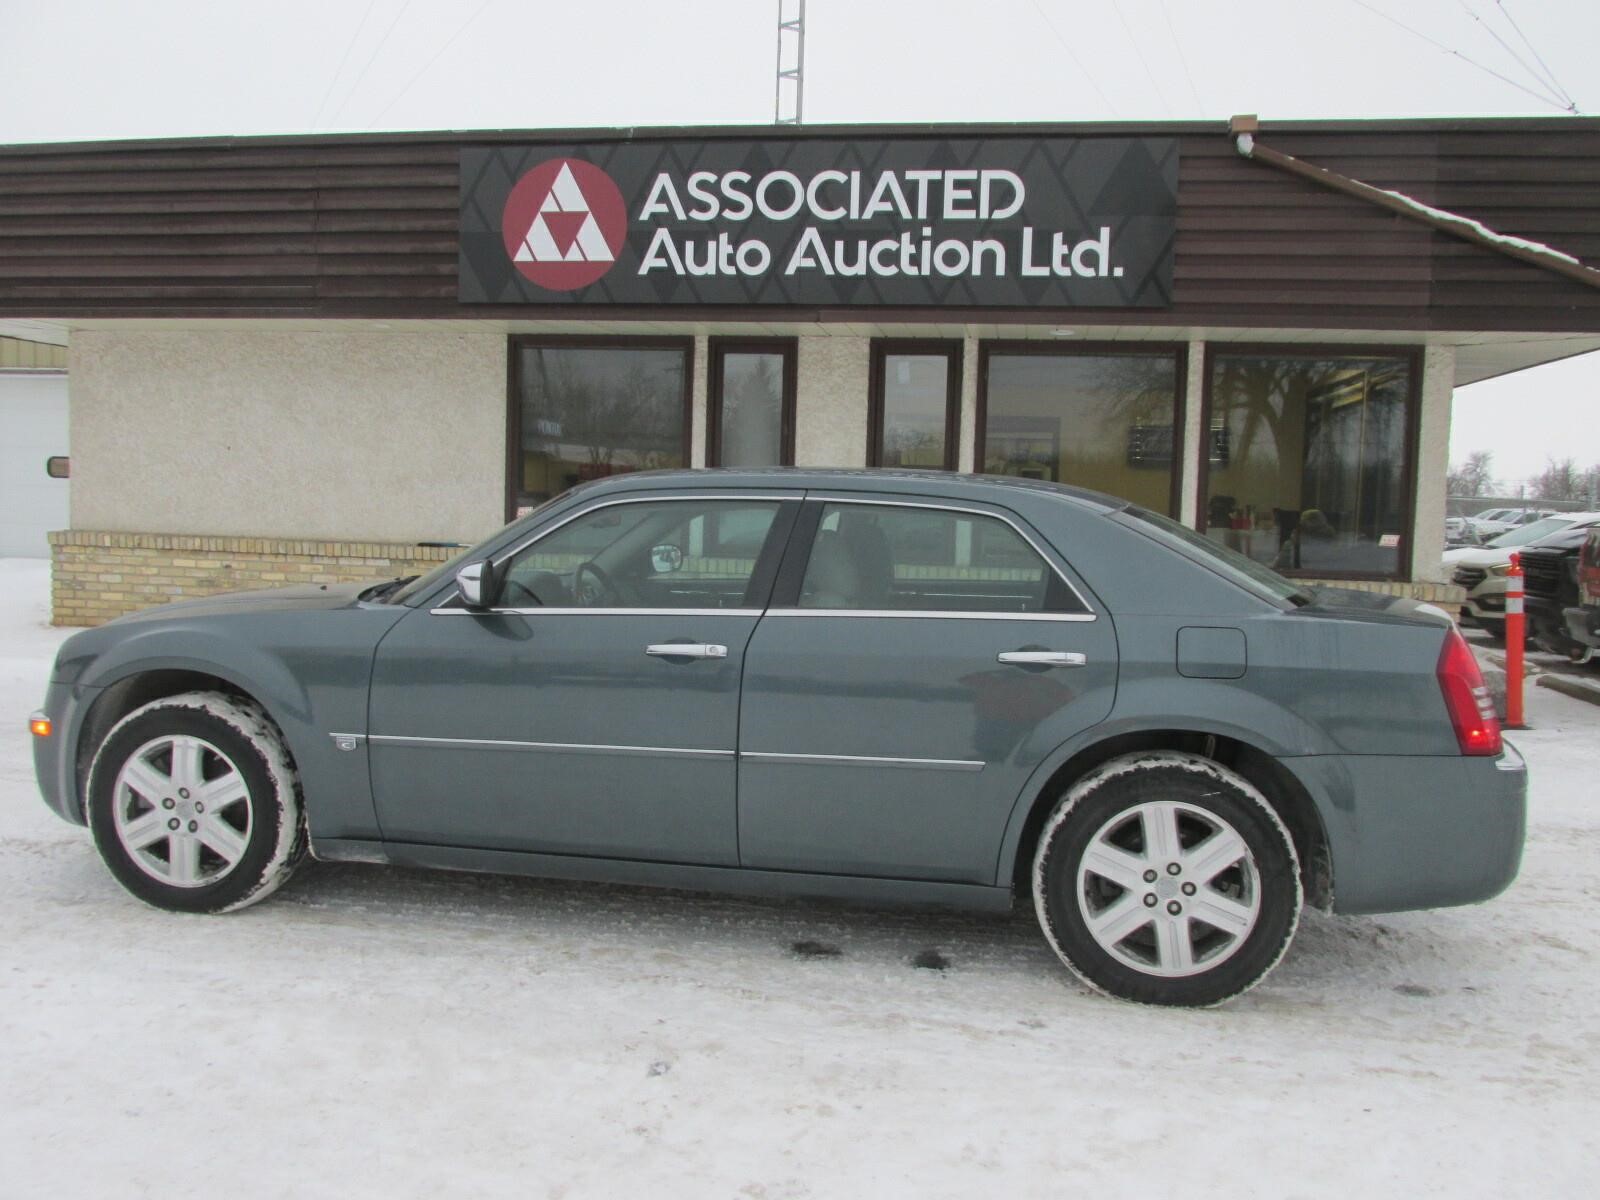 Online Auto Auction March 8 2021 Regular Consignment